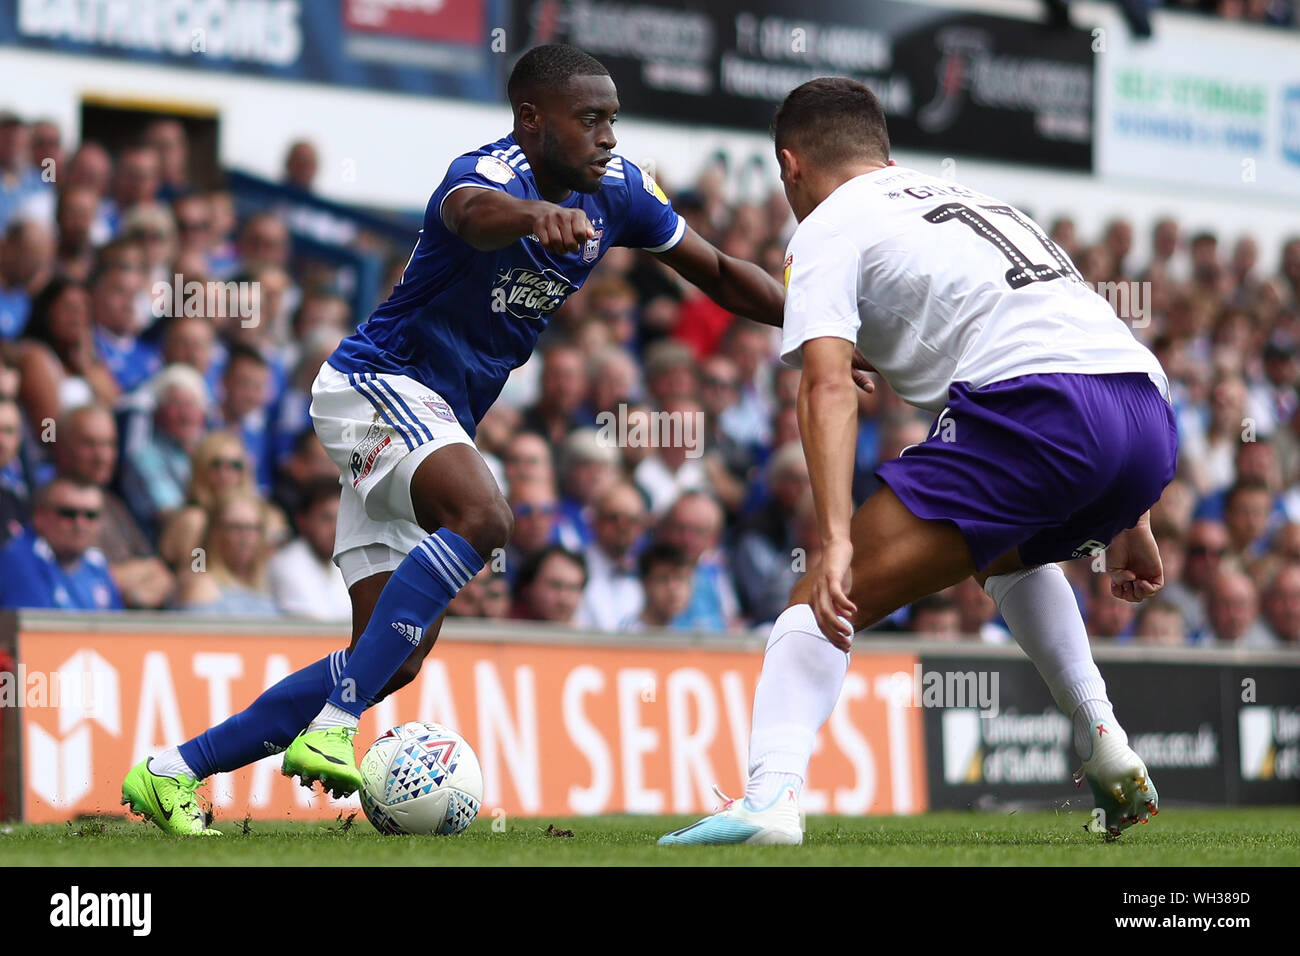 Kane Vincent-Young of Ipswich Town takes on Ryan Giles of Shrewsbury Town - Ipswich Town v Shrewsbury Town, Sky Bet League One, Portman Road, Ipswich, UK - 31st August 2019  Editorial Use Only - DataCo restrictions apply Stock Photo